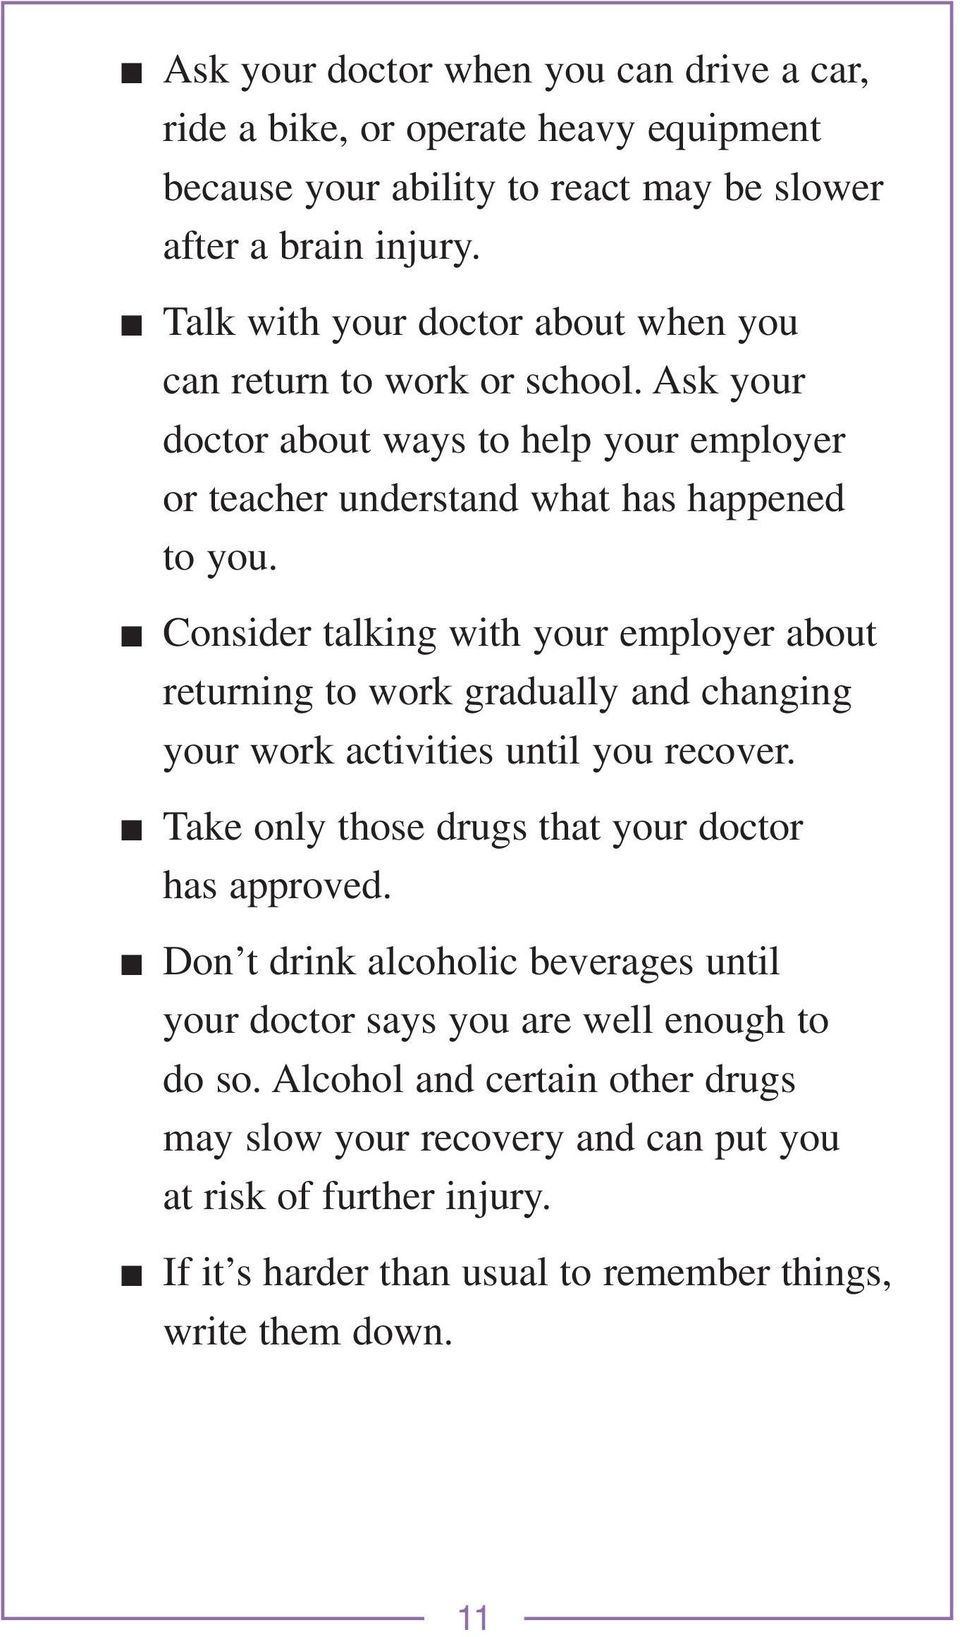 Consider talking with your employer about returning to work gradually and changing your work activities until you recover. Take only those drugs that your doctor has approved.